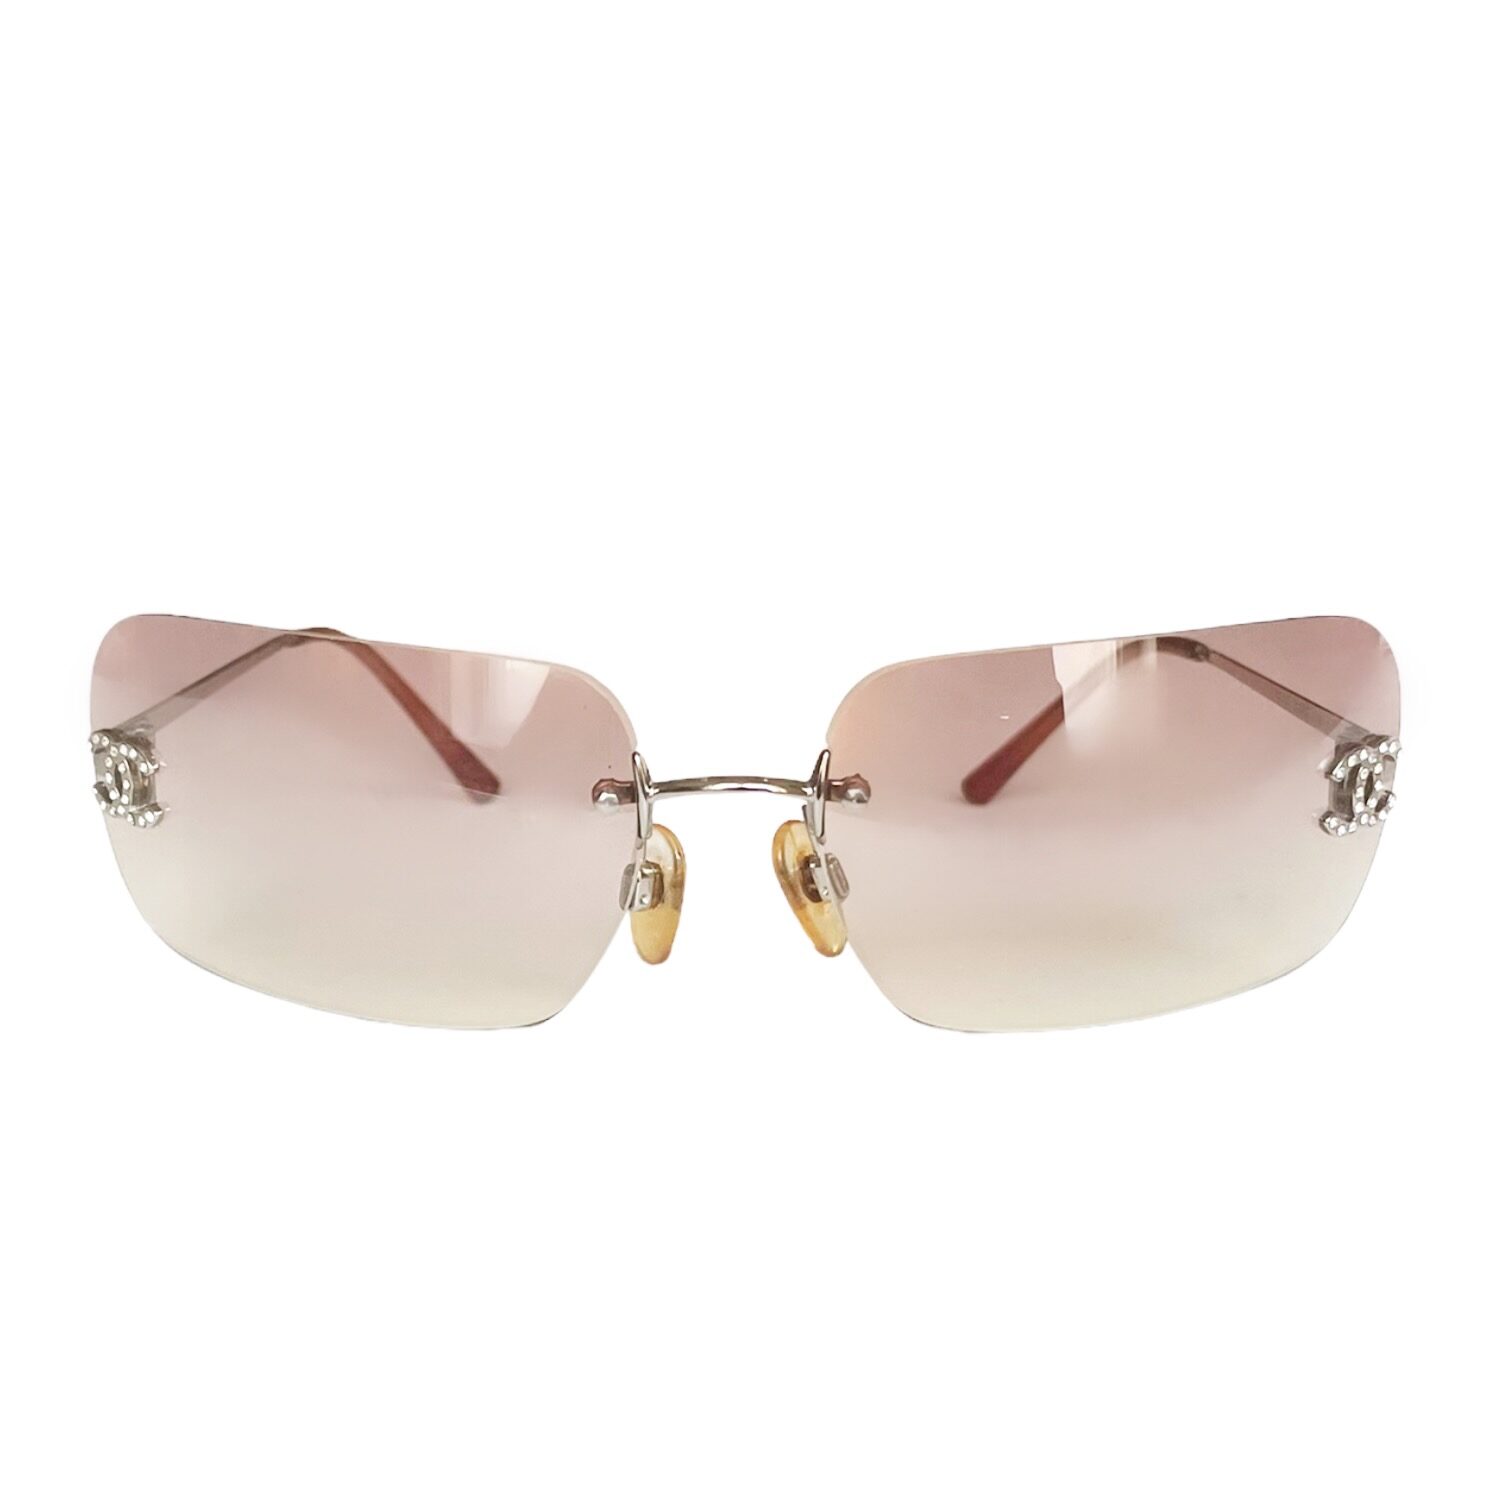 Vintage Chanel Diamant Ombre Rimless Sunglasses in Baby Pink | NITRYL